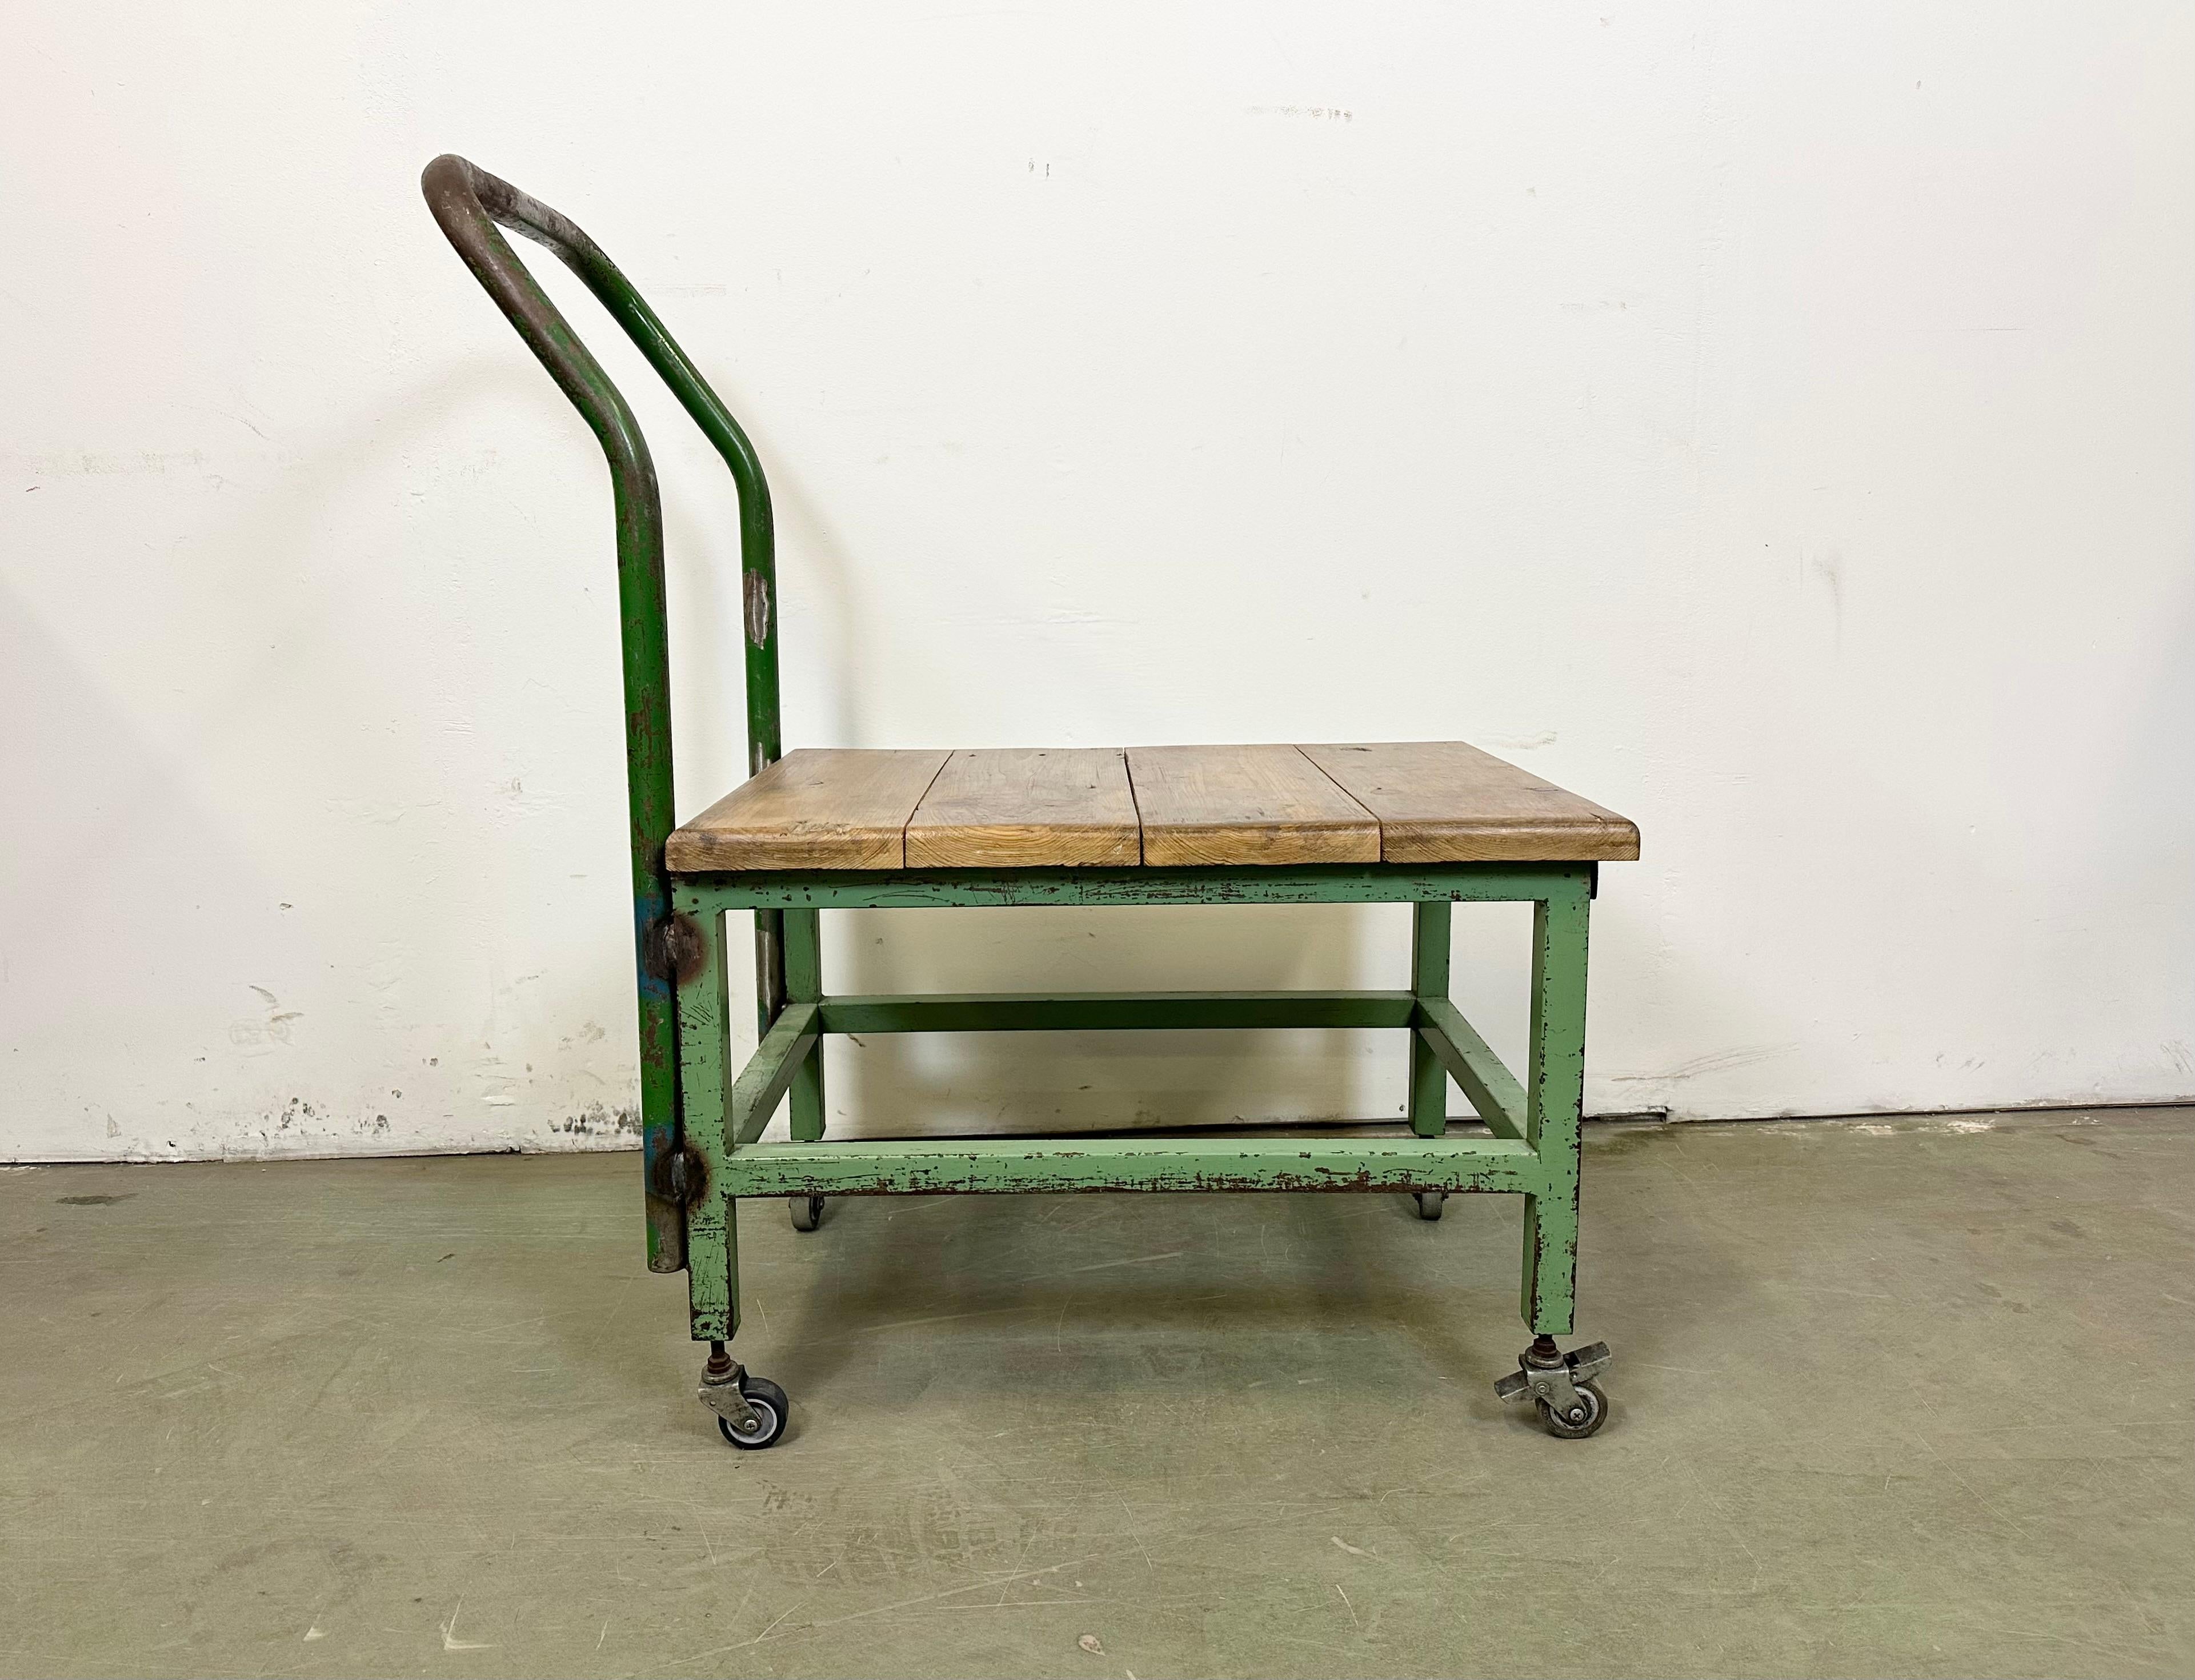 - Vintage Industrial trolley made in former Czechoslovakia during the 1960s
- Green iron construction, solid wooden plate 
- 4 original wheels 
Adittional dimensions:
- Wooden plate : 65cm x 47 cm
- Height of the wooden plate : 46 cm
- Height of the